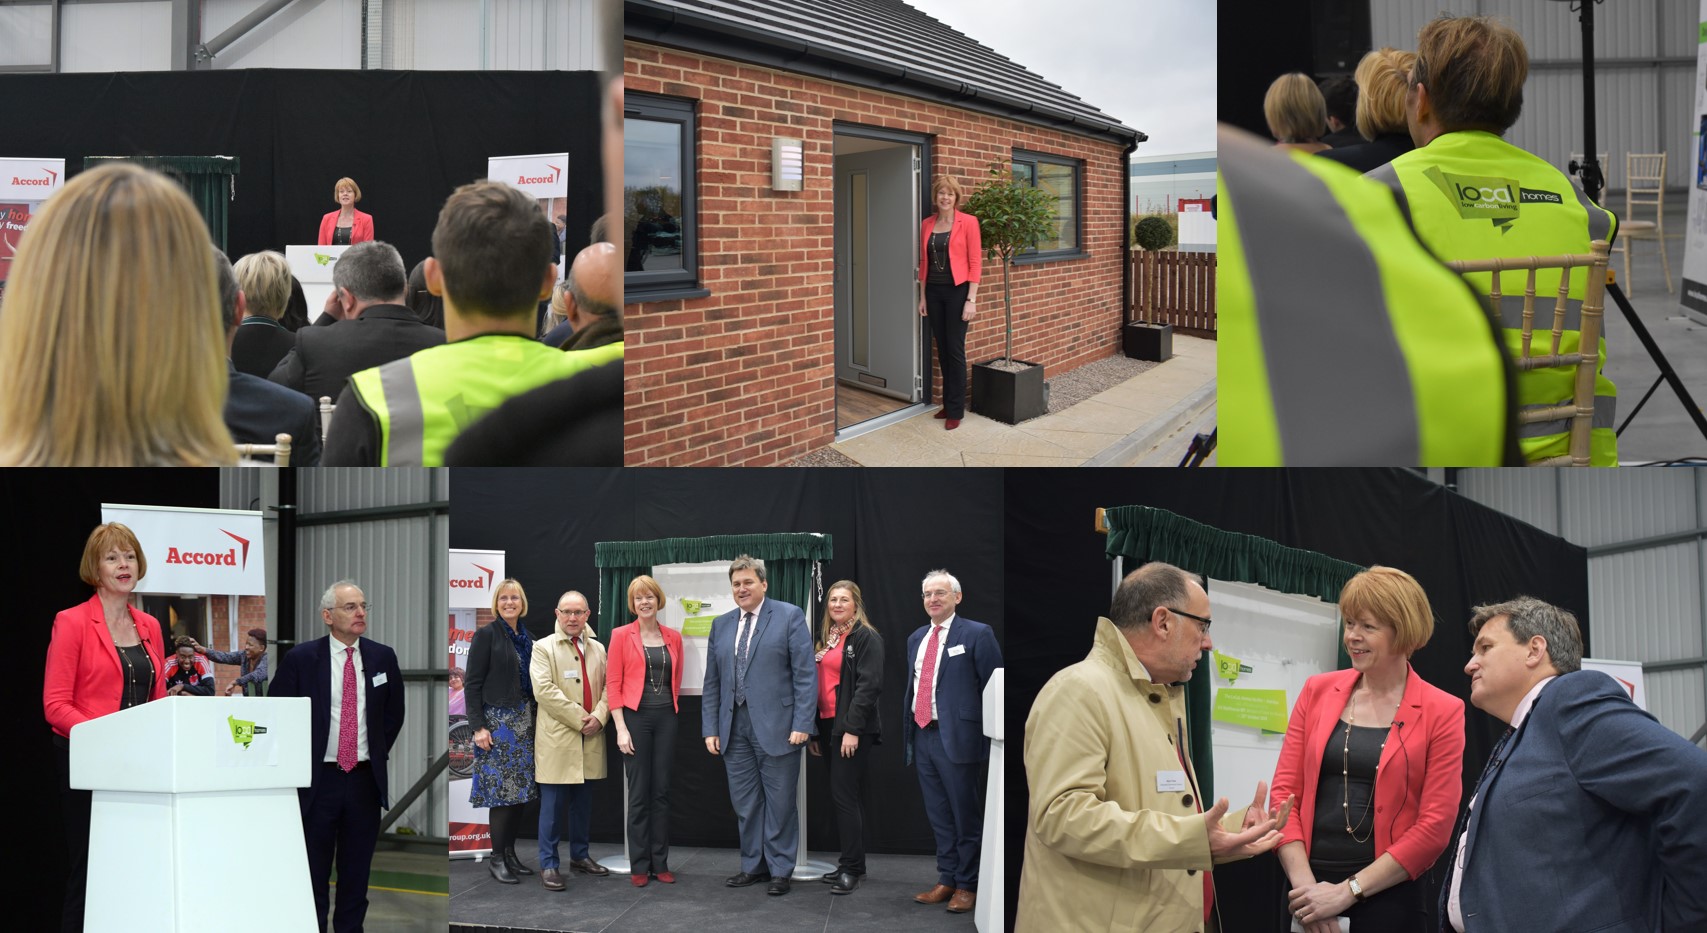 Welcoming new business and new jobs for Aldridge